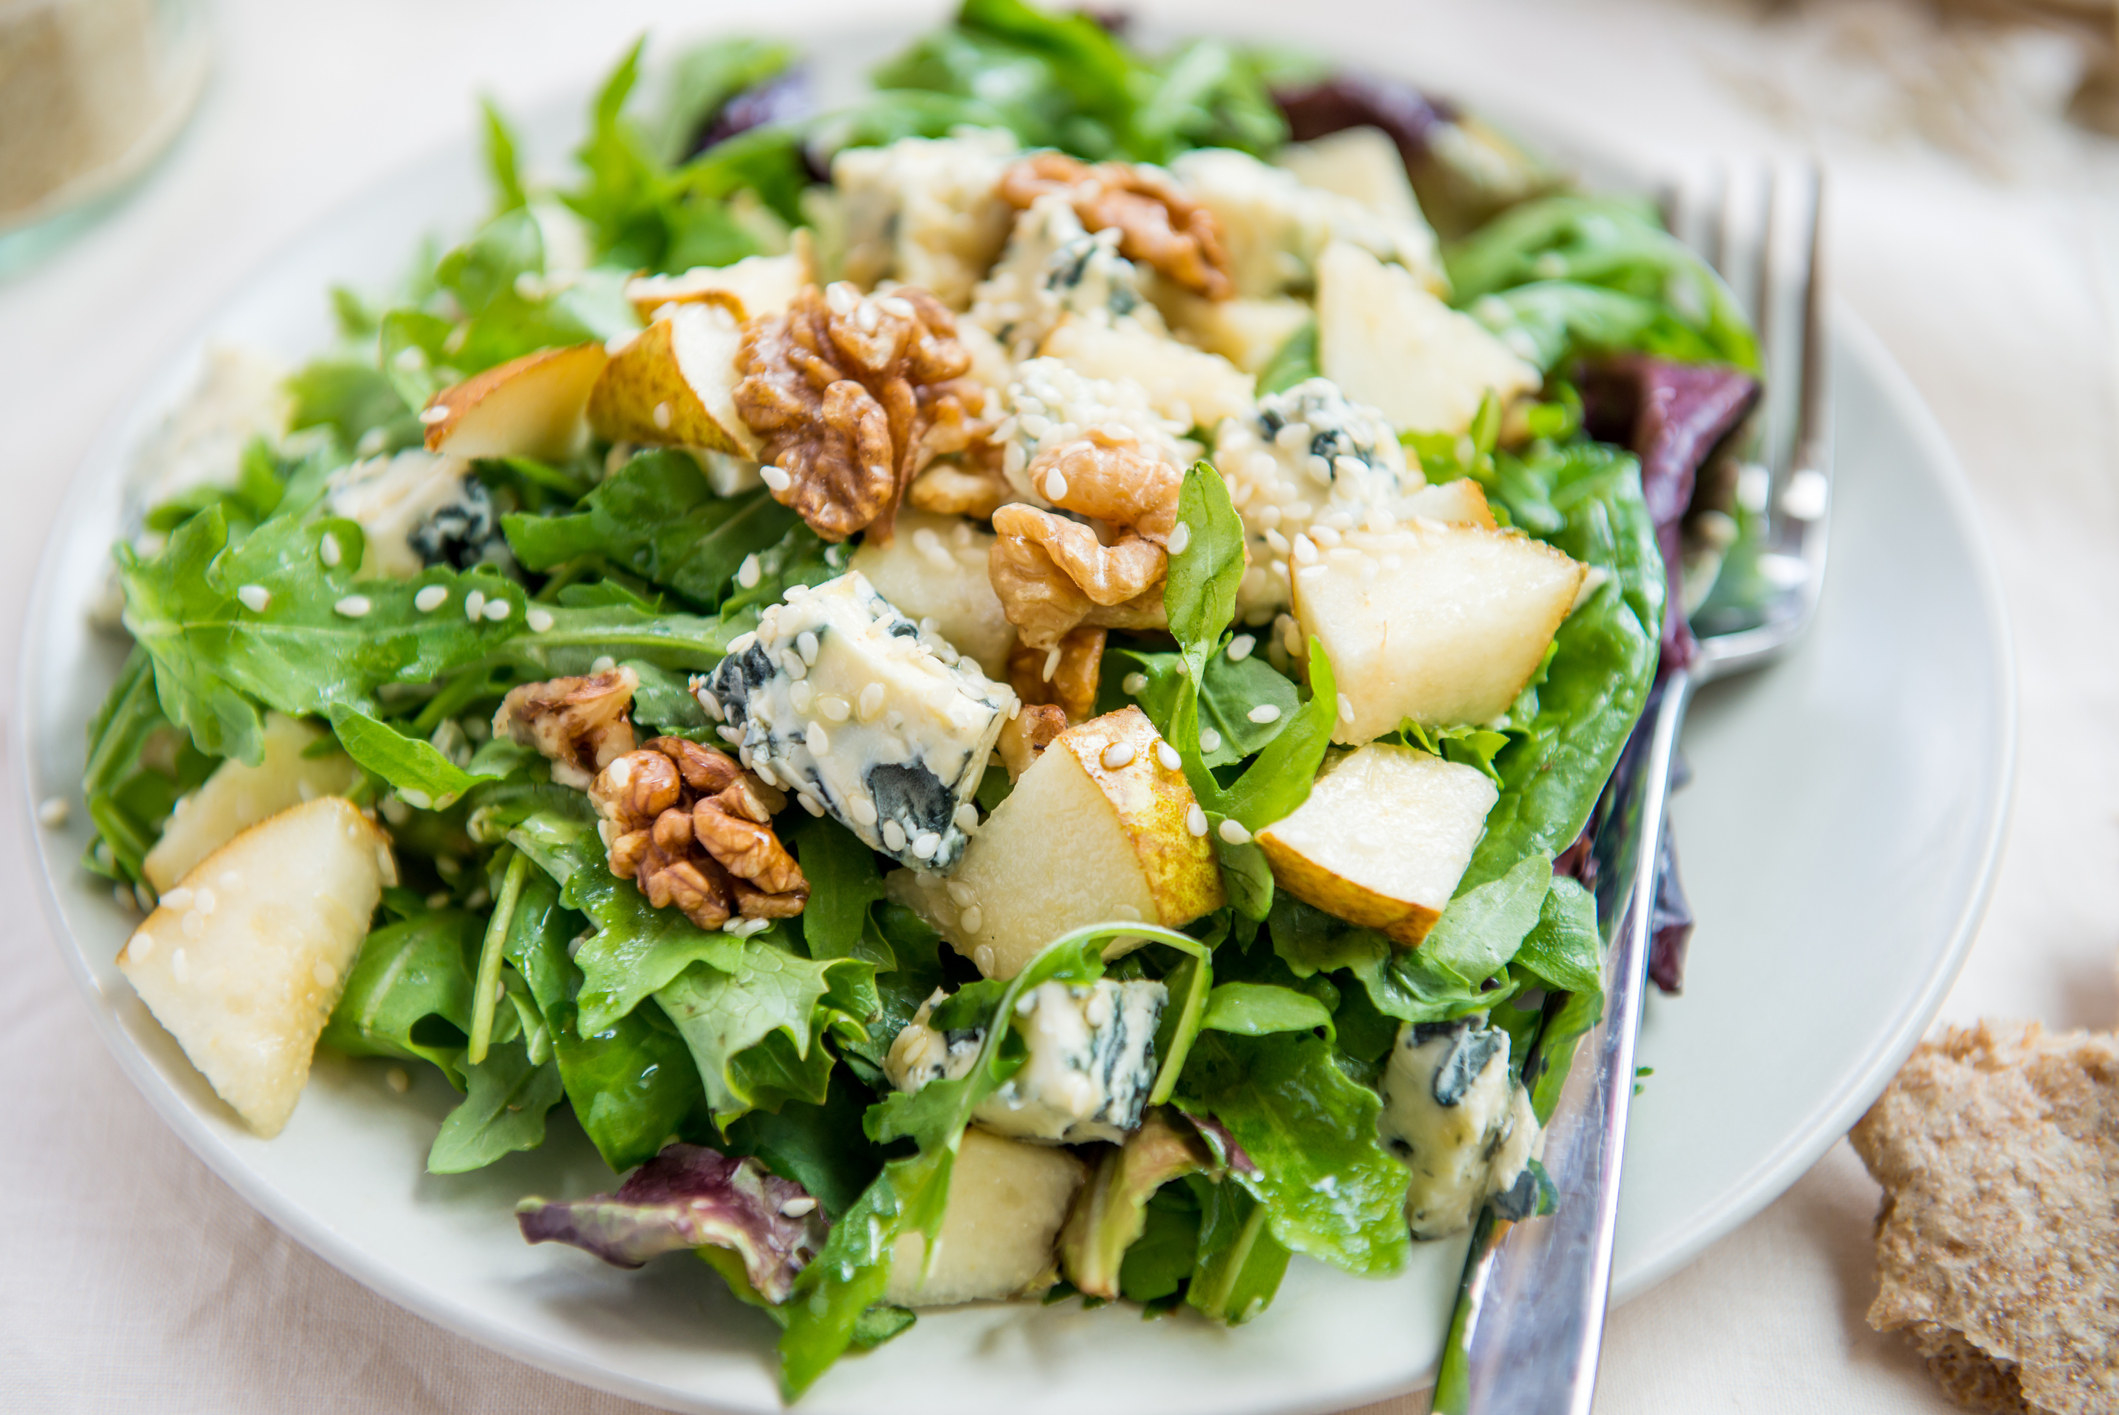 Green salad with pear, walnuts, and blue cheese.